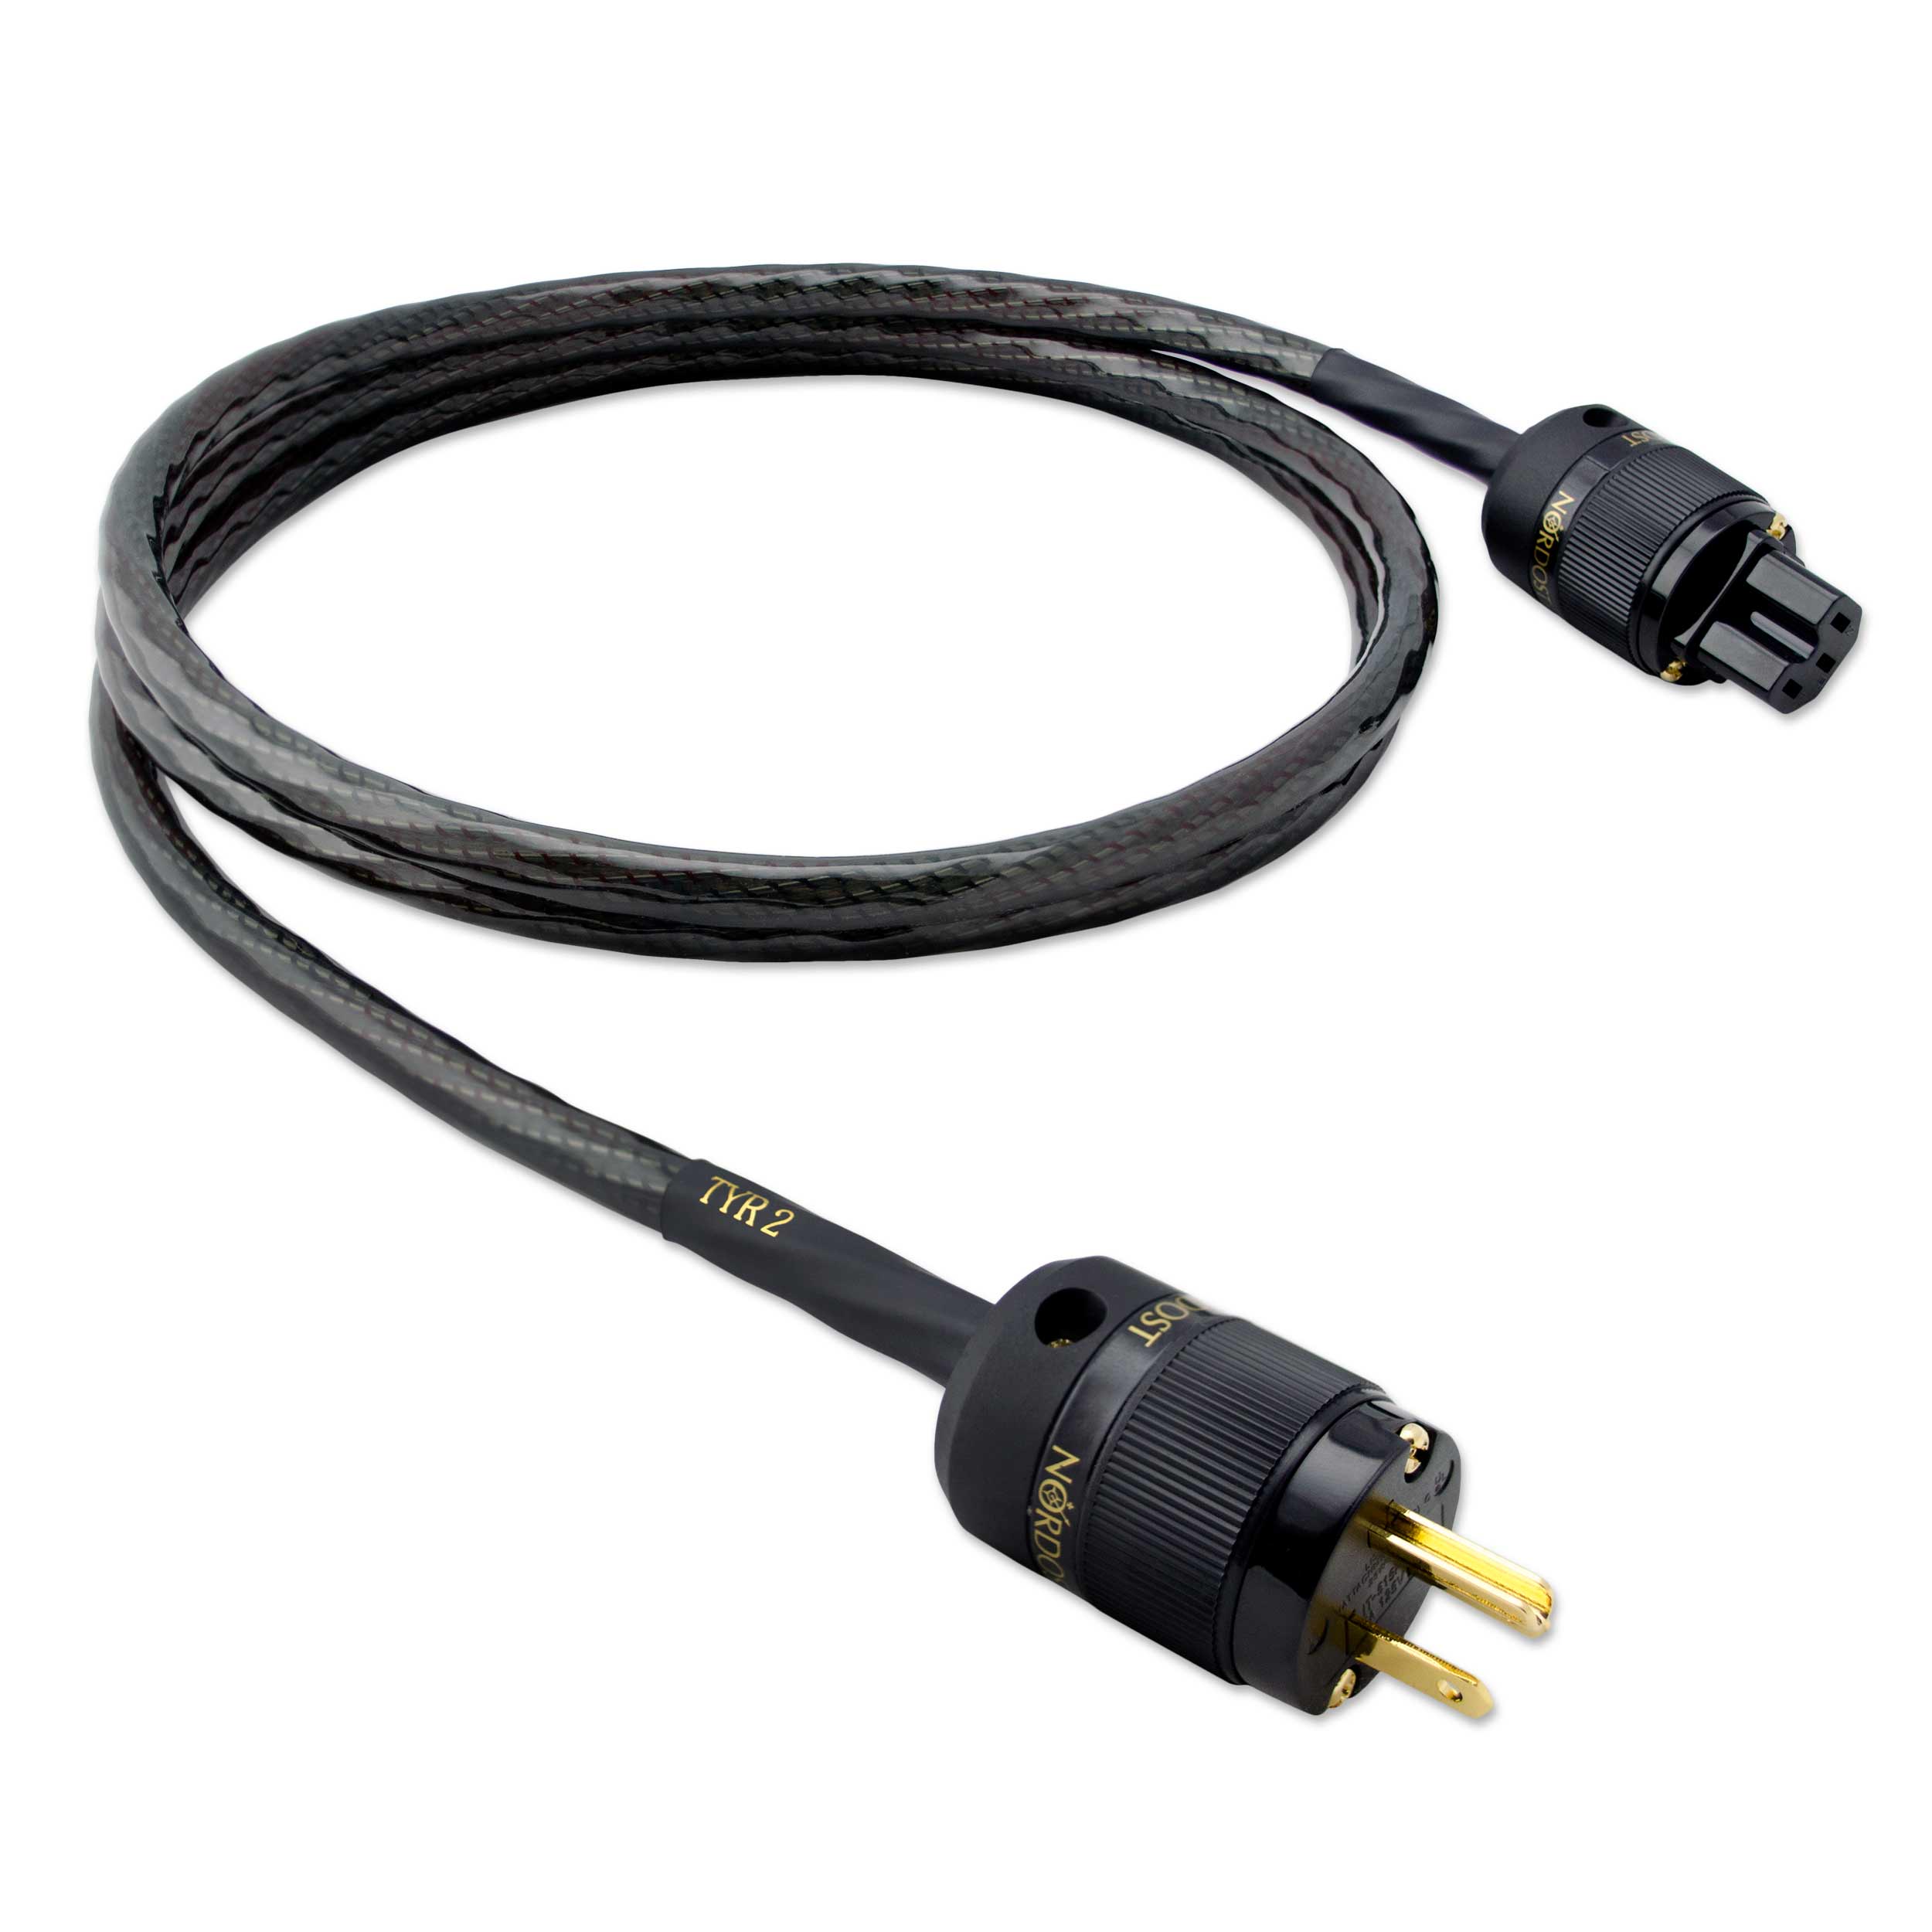 Nordost TYR 2 Power Cord - Sold as a Single